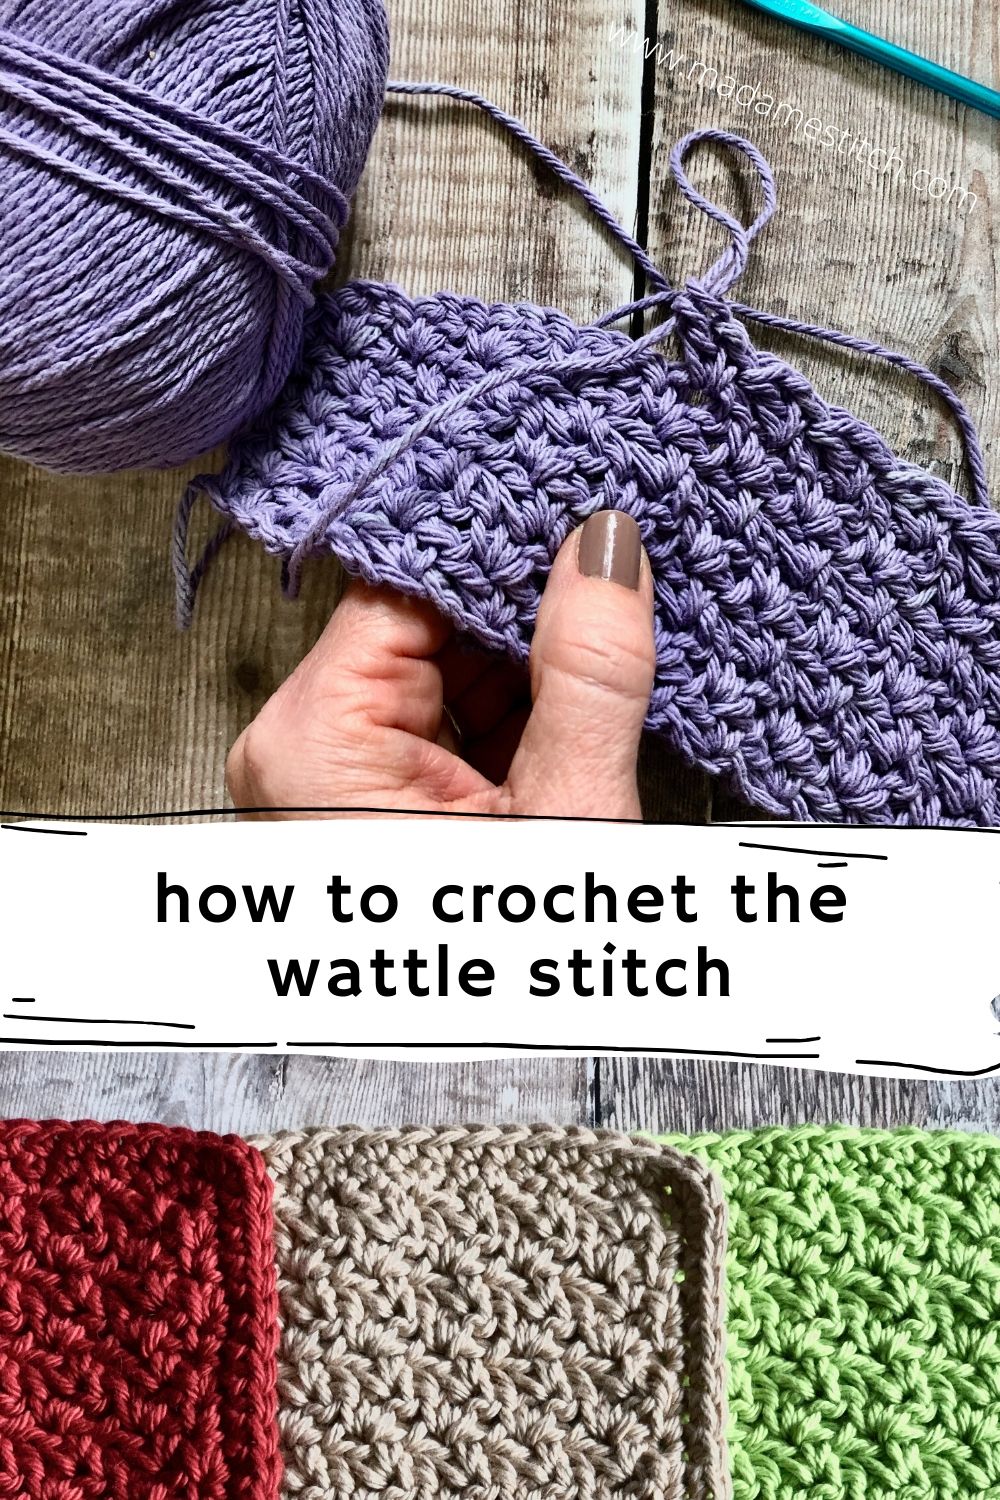 How to crochet the wattle stitch